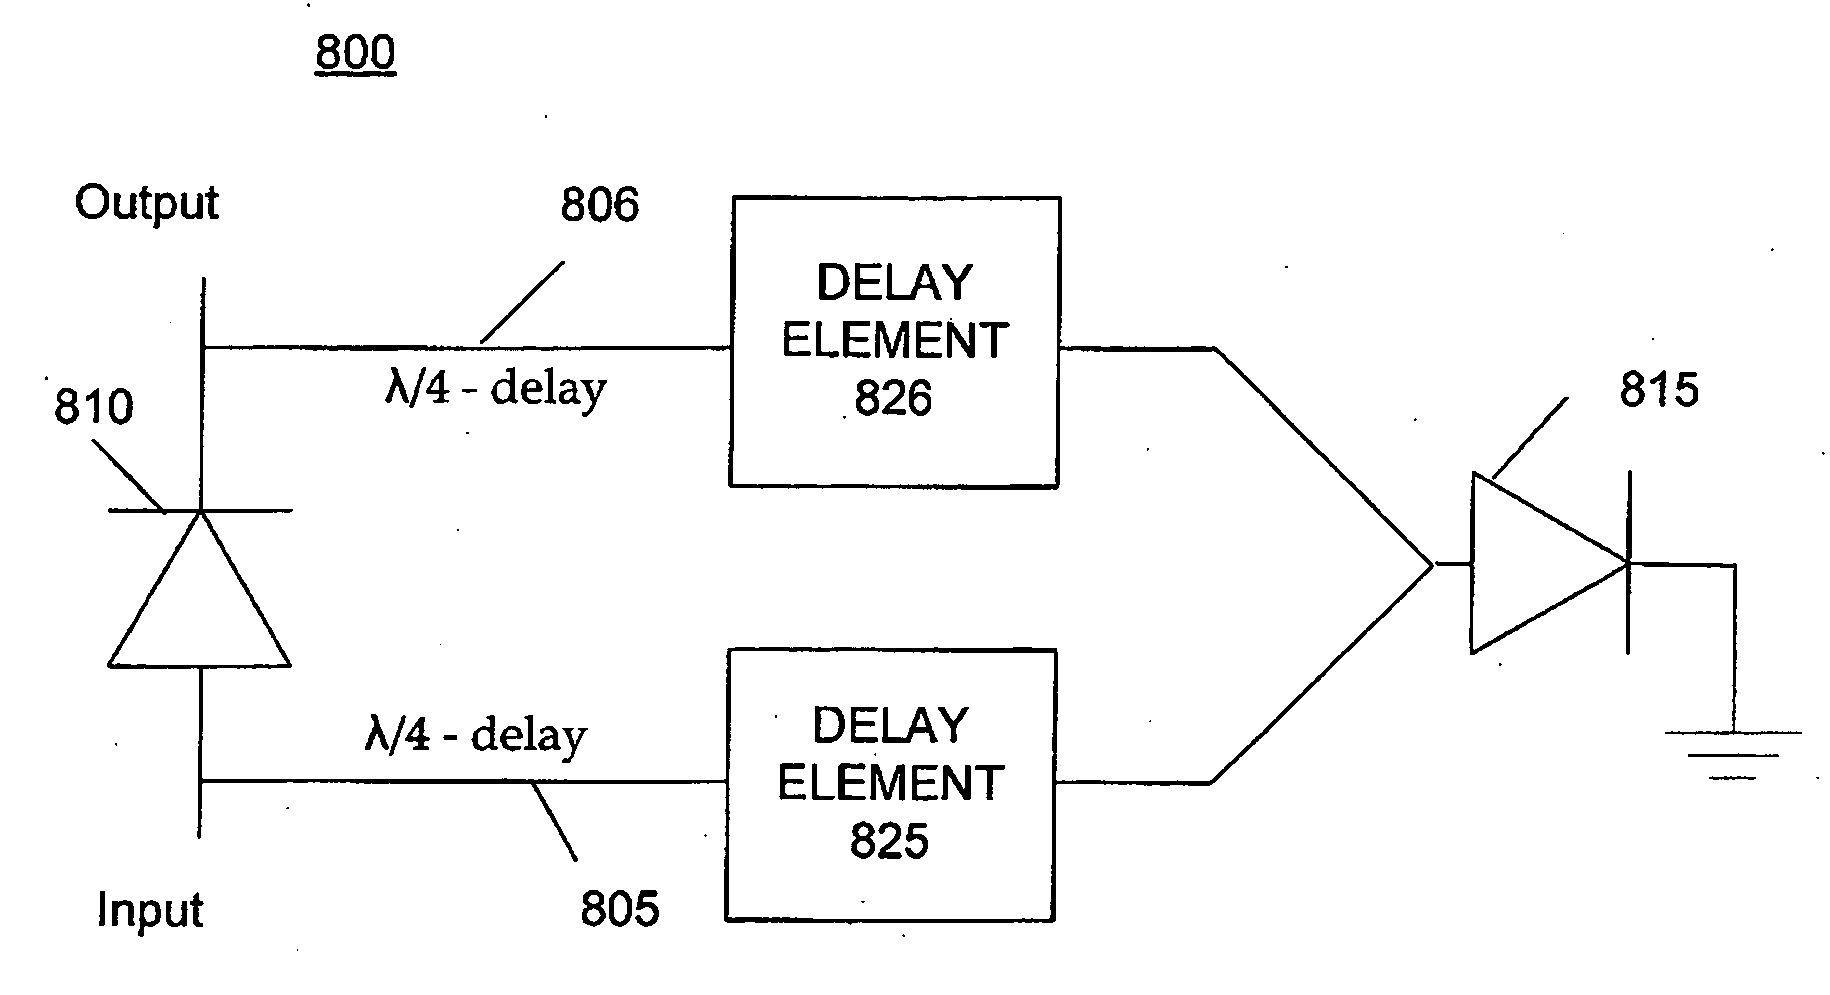 Circuit board having a pereipheral antenna apparatus with selectable antenna elements and selectable phase shifting